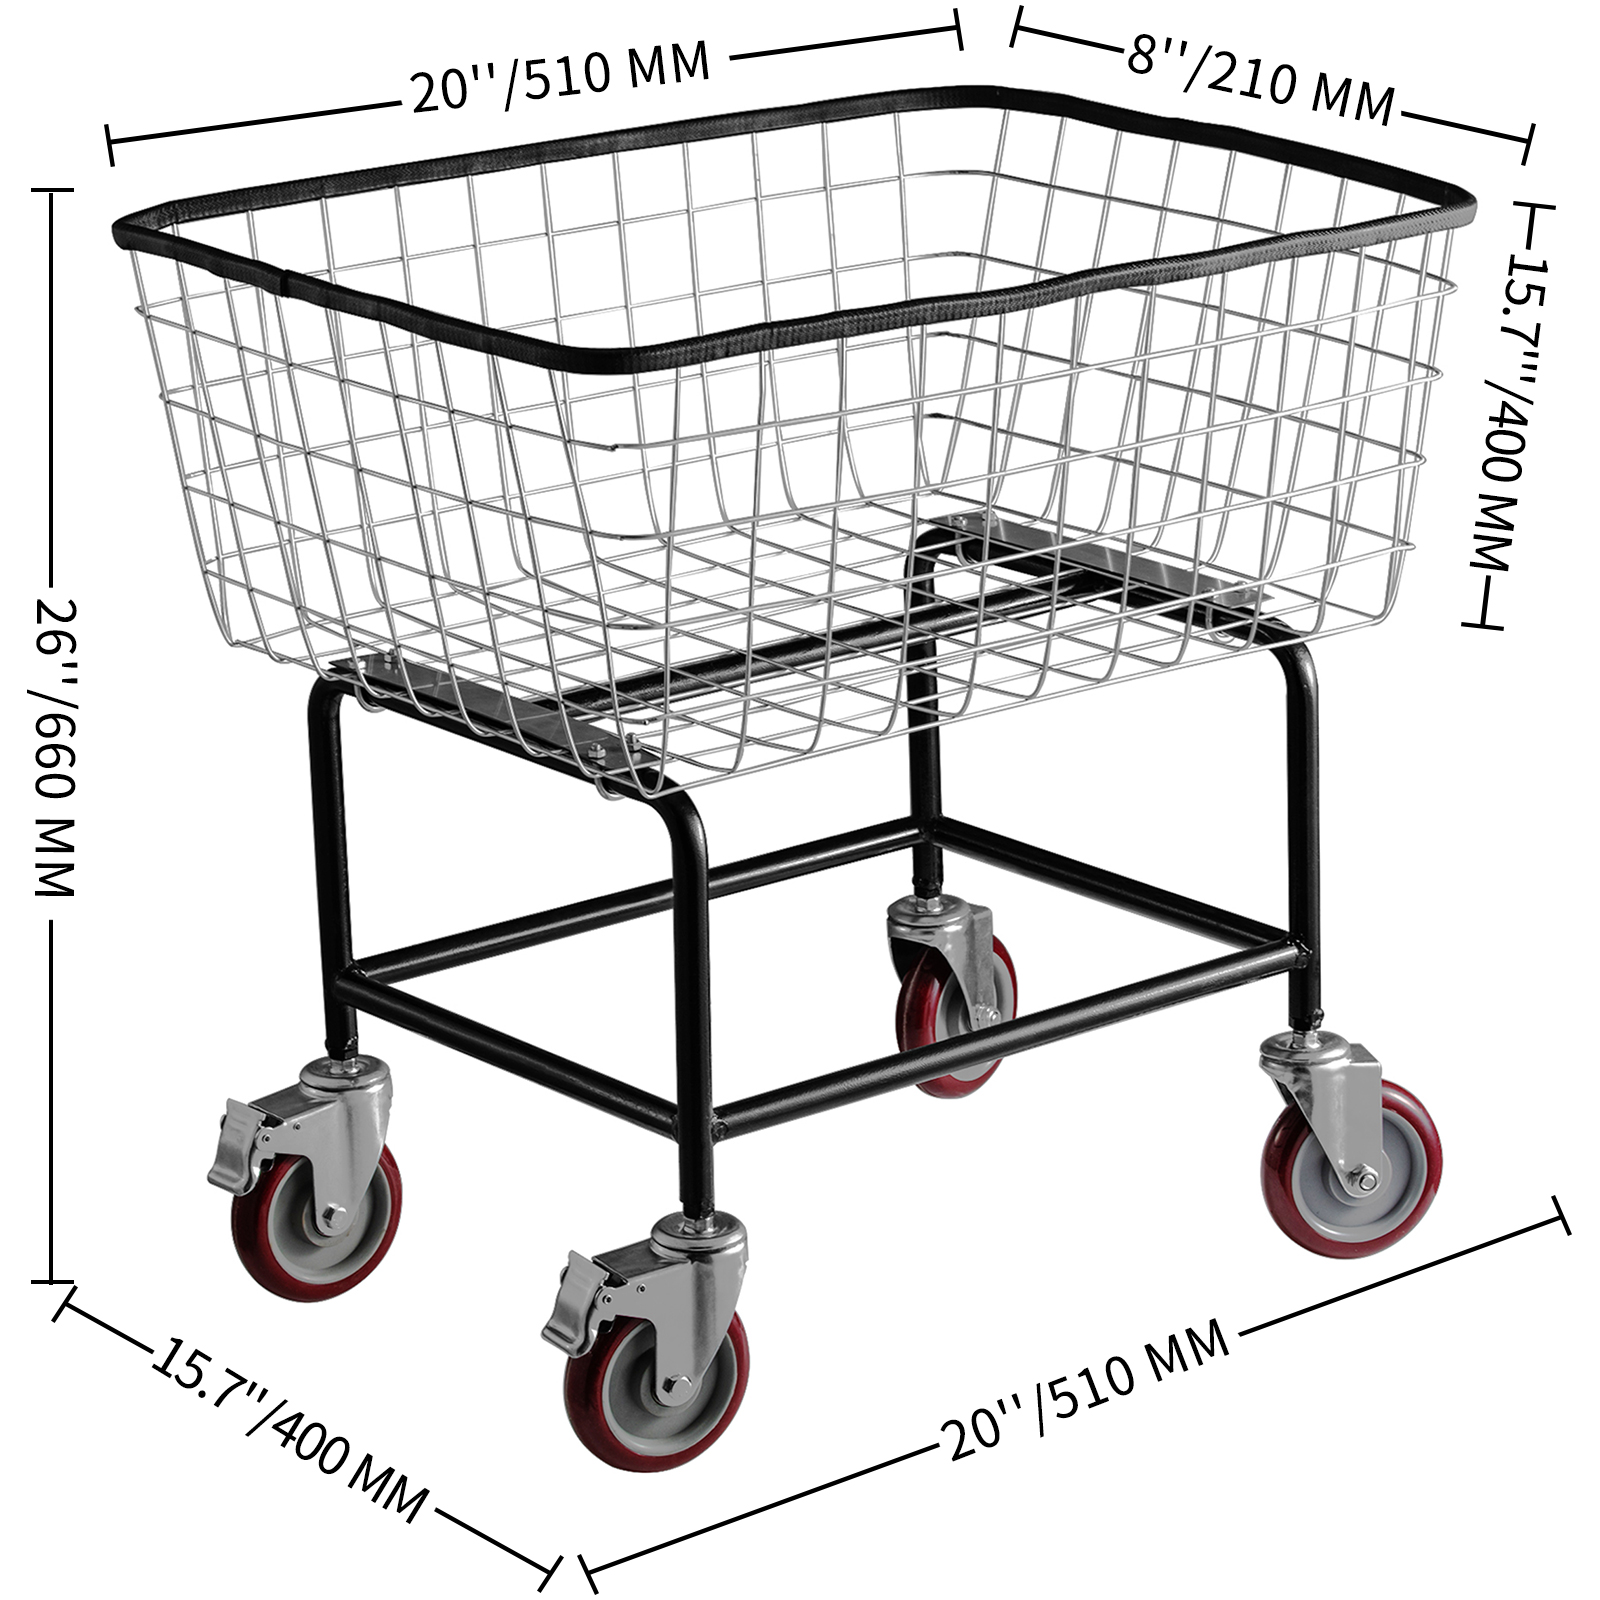 VEVORbrand Steel Rolling Laundry Cart 2.2 Bushel, Wire Laundry Basket with Wheels, Steel Frame with Galvanized Finish, 5" Casters, Wire Cart for Laundry - image 2 of 9